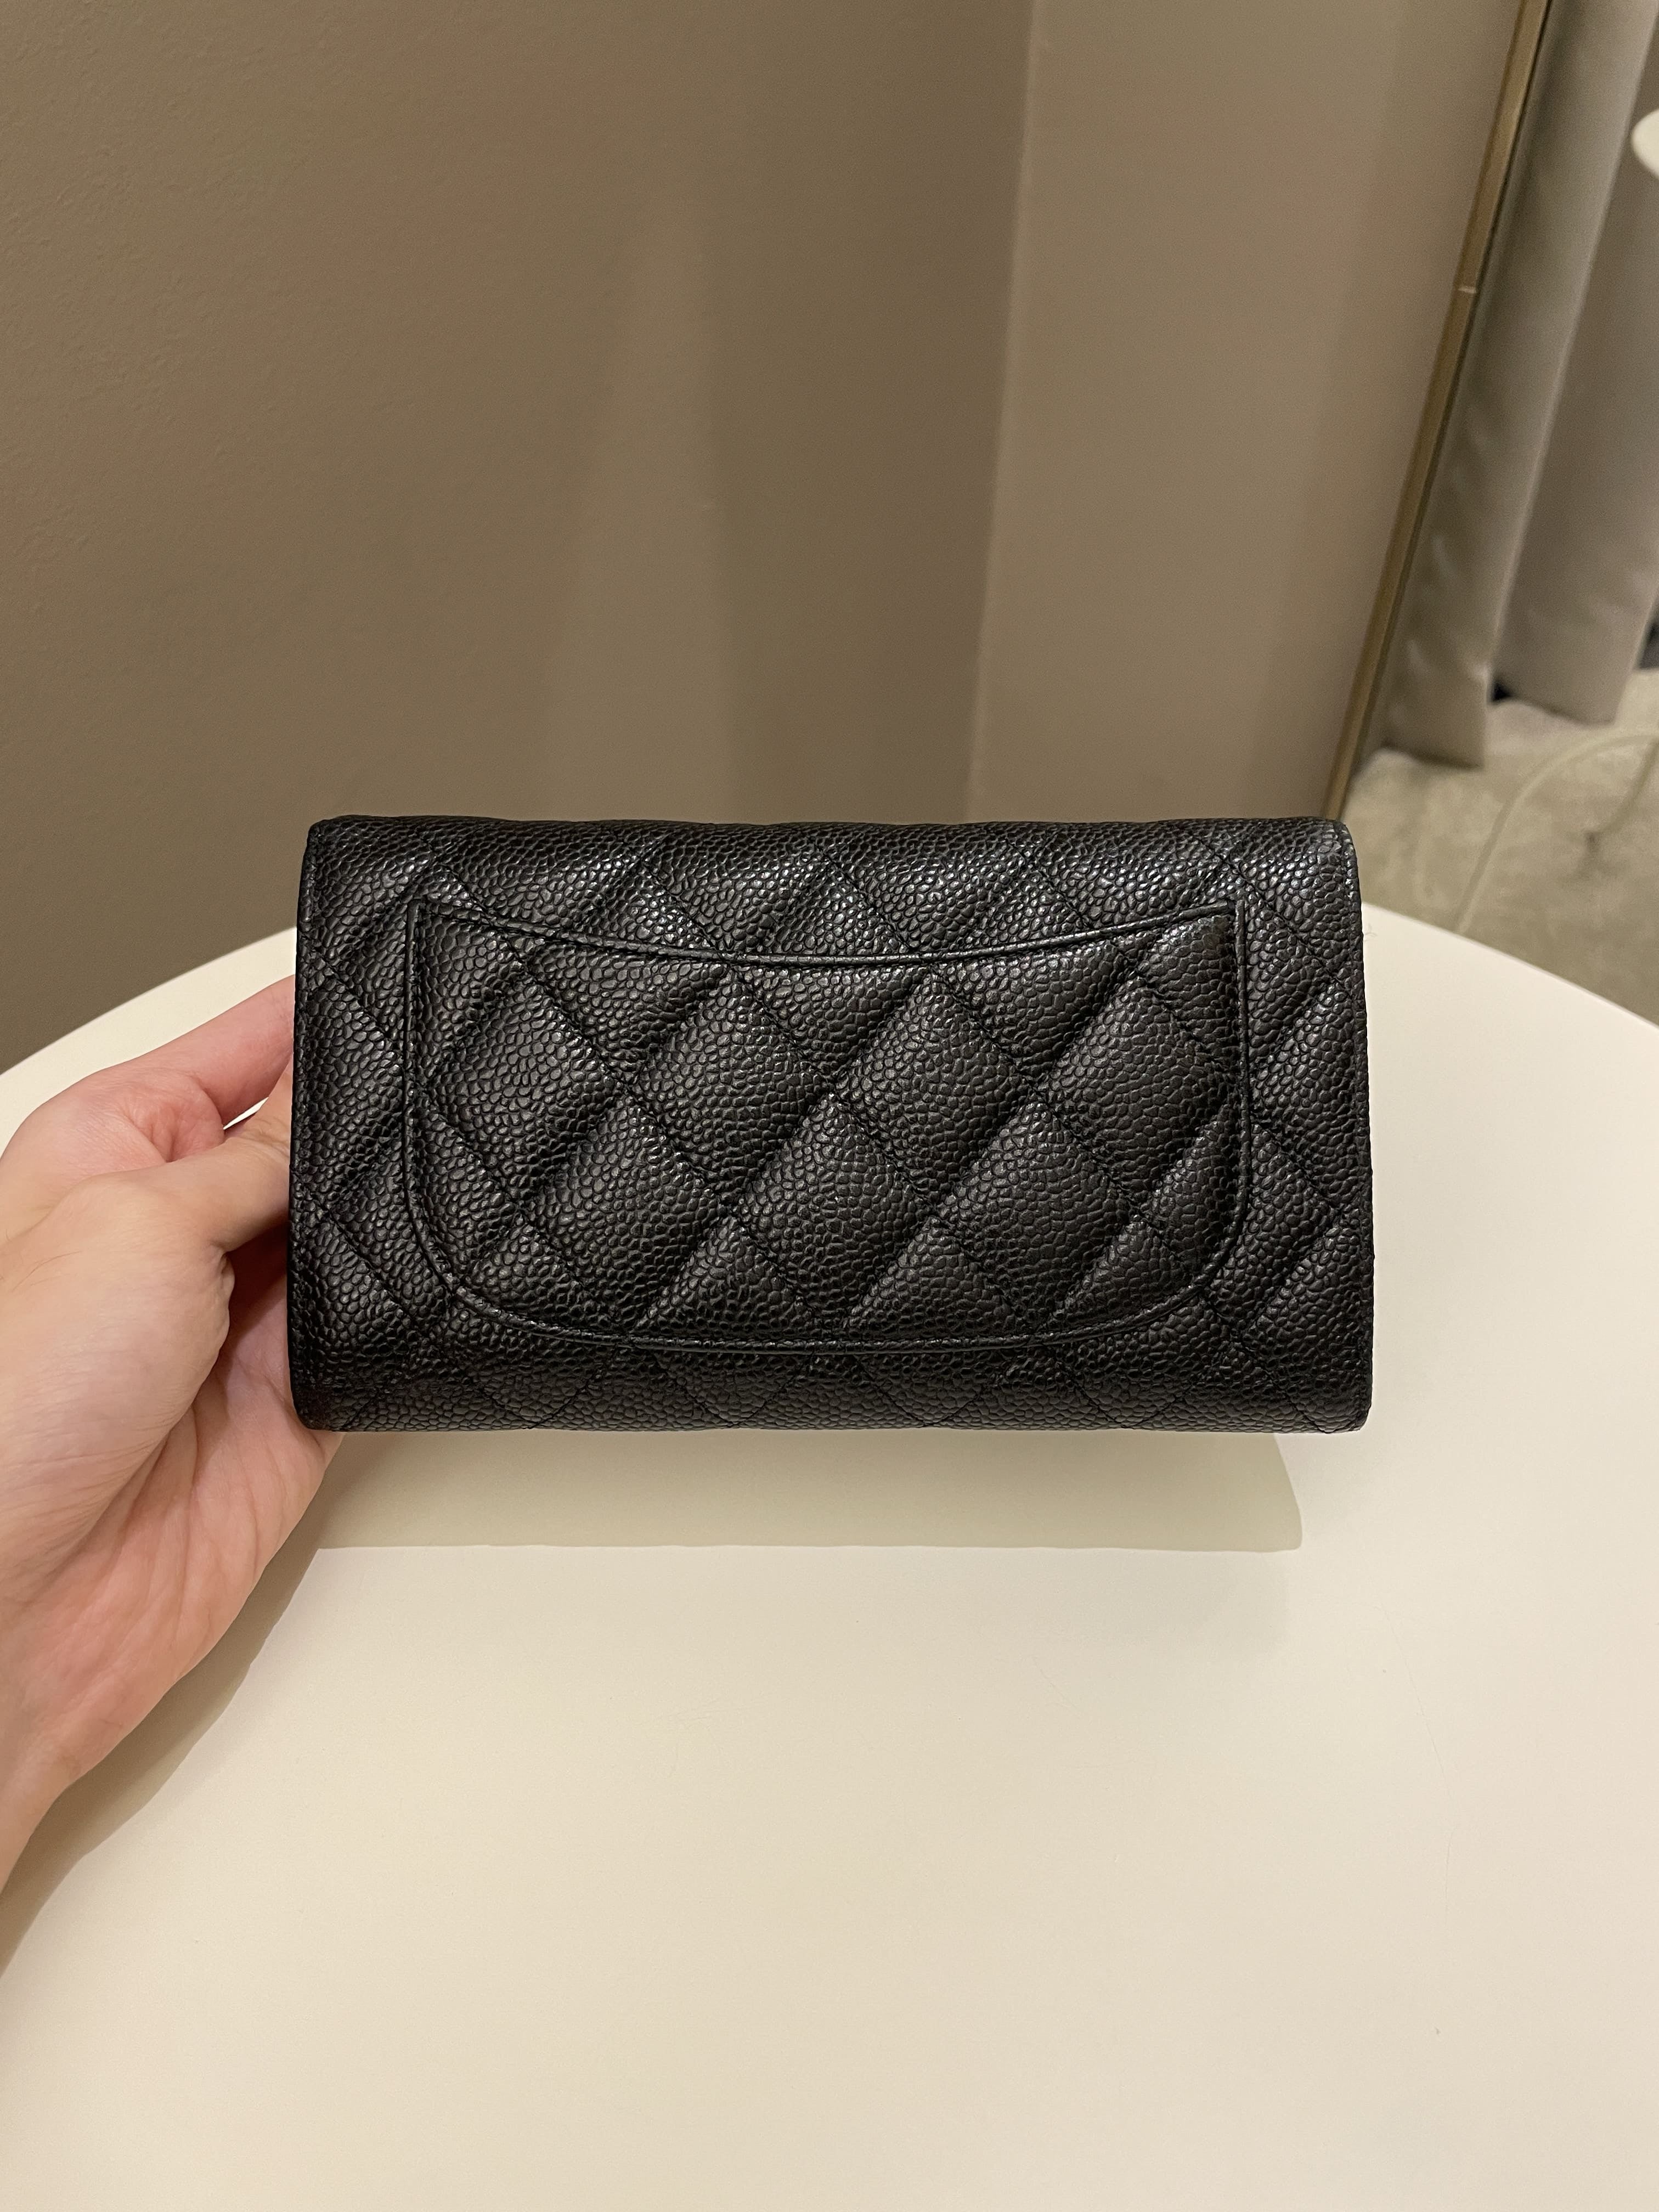 chanel womens wallets leather